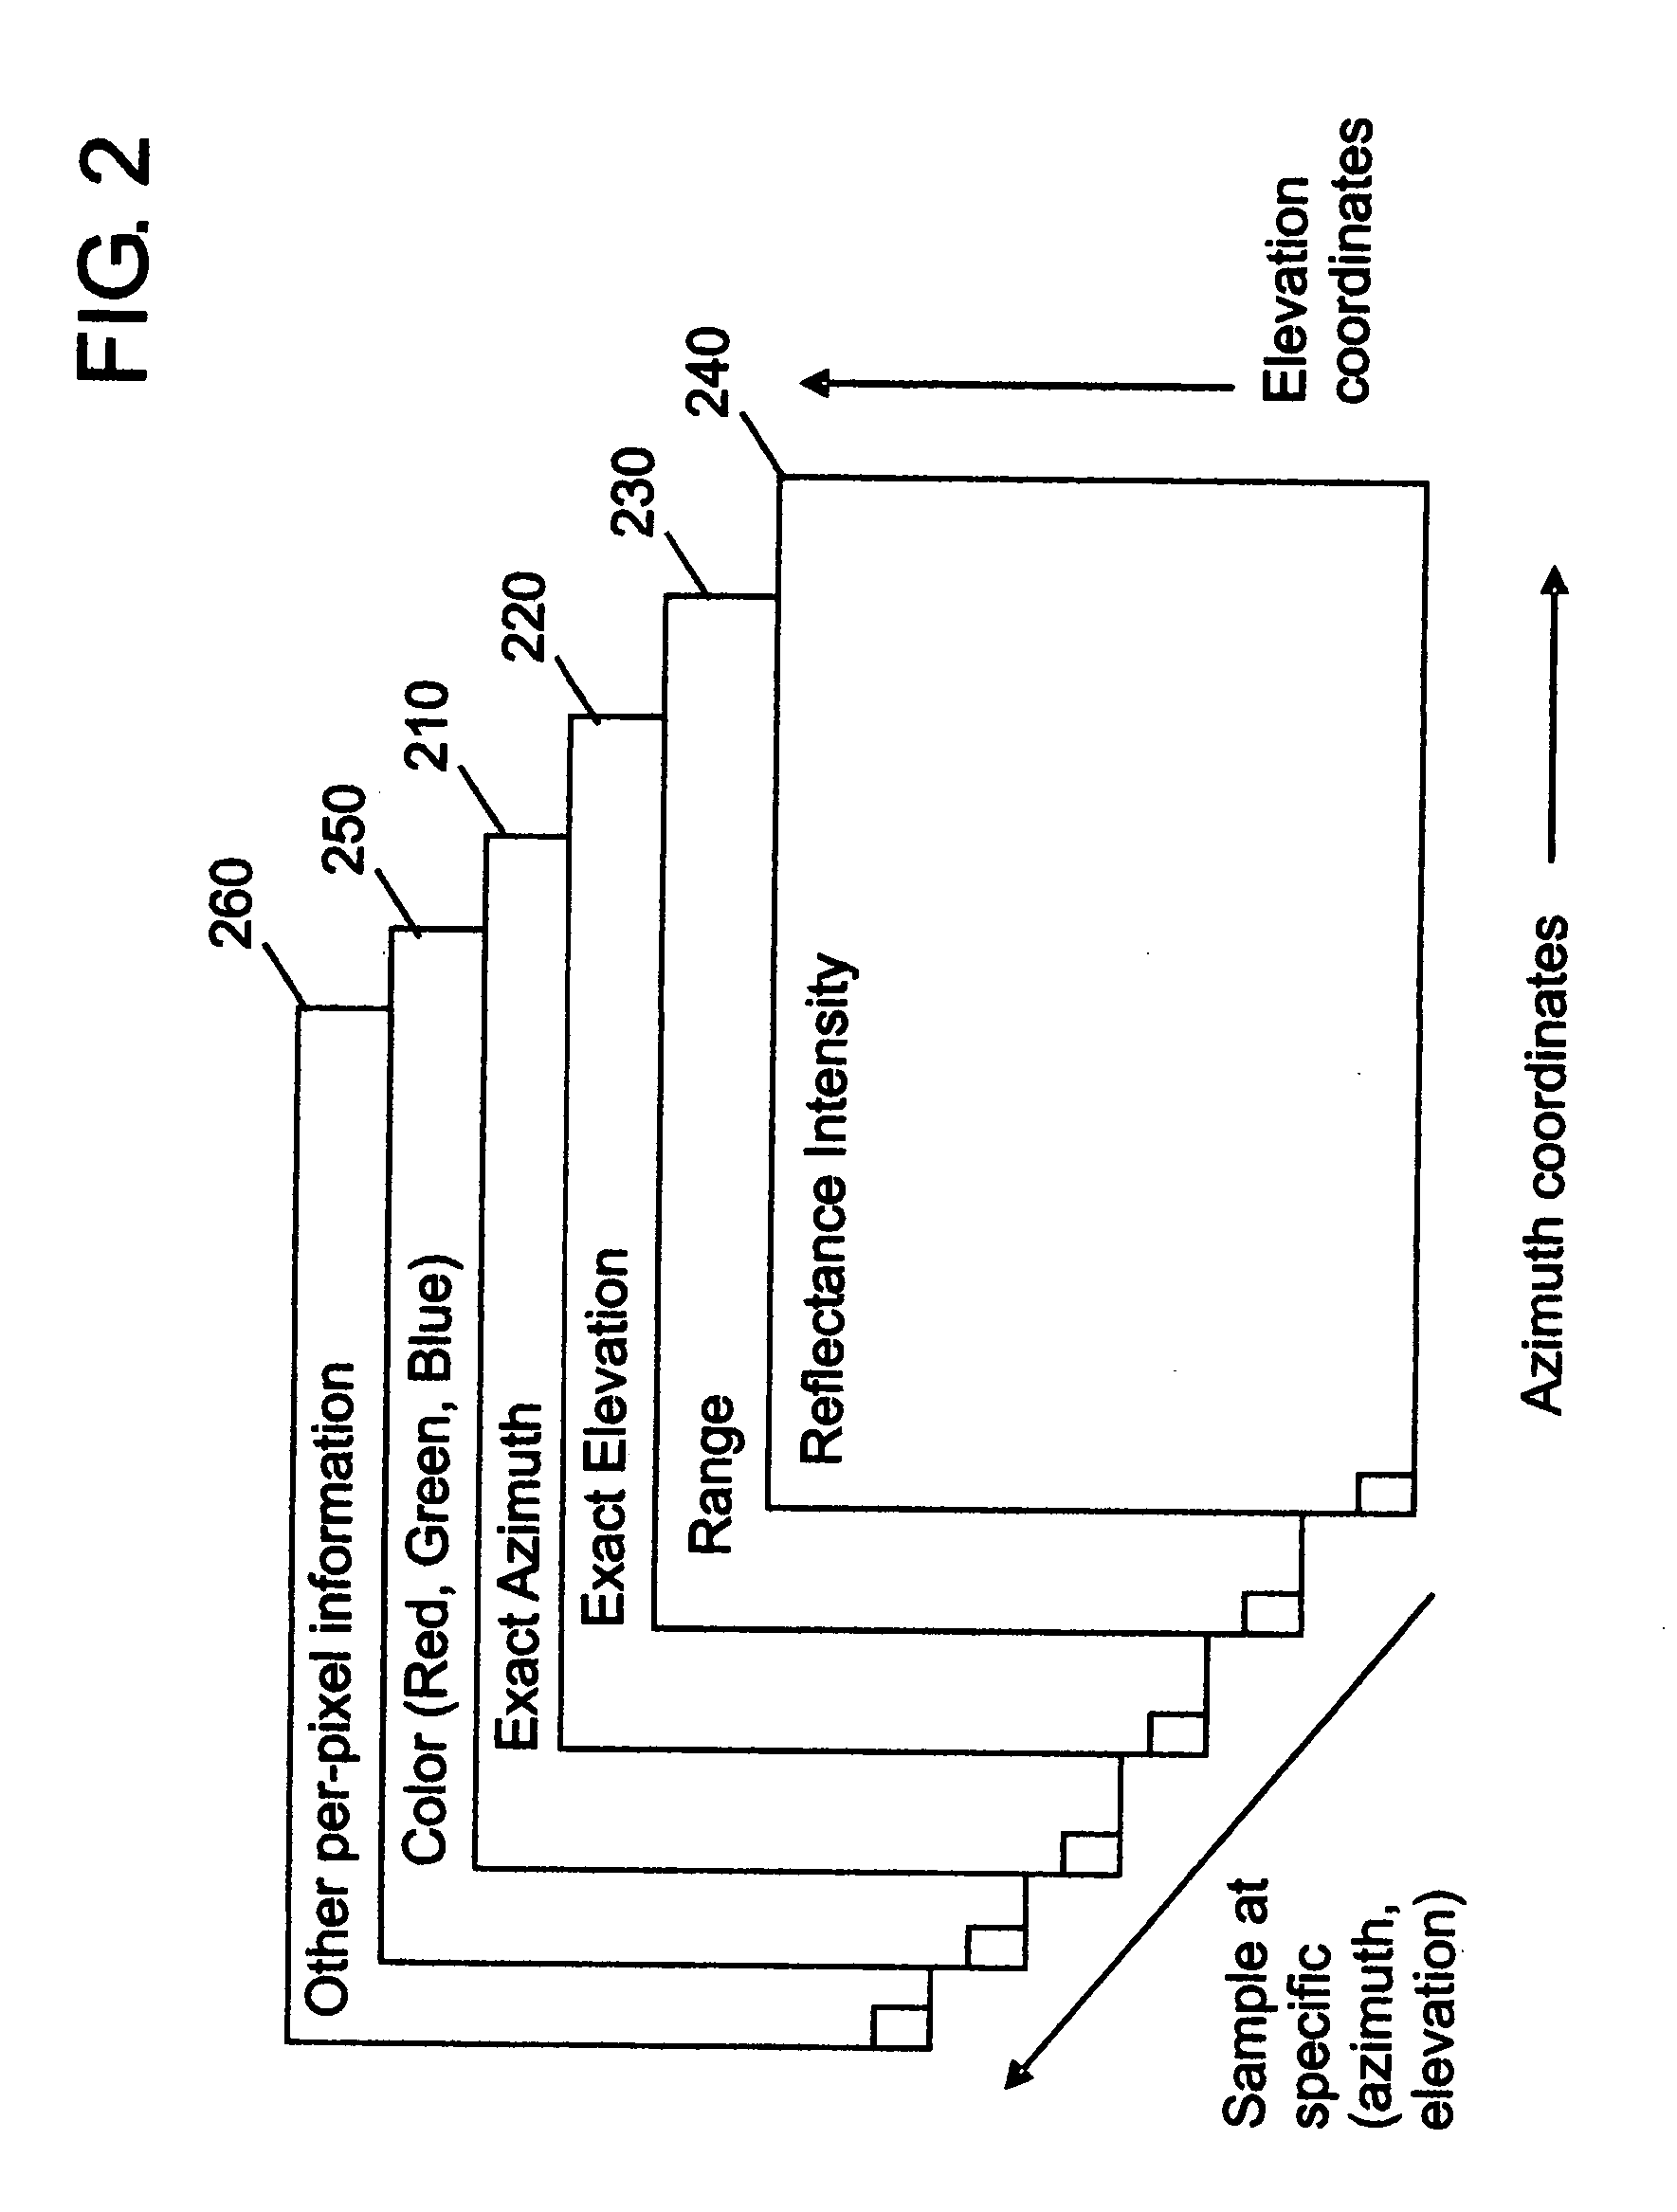 Method and apparatus for determining the geometric correspondence between multiple 3D rangefinder data sets